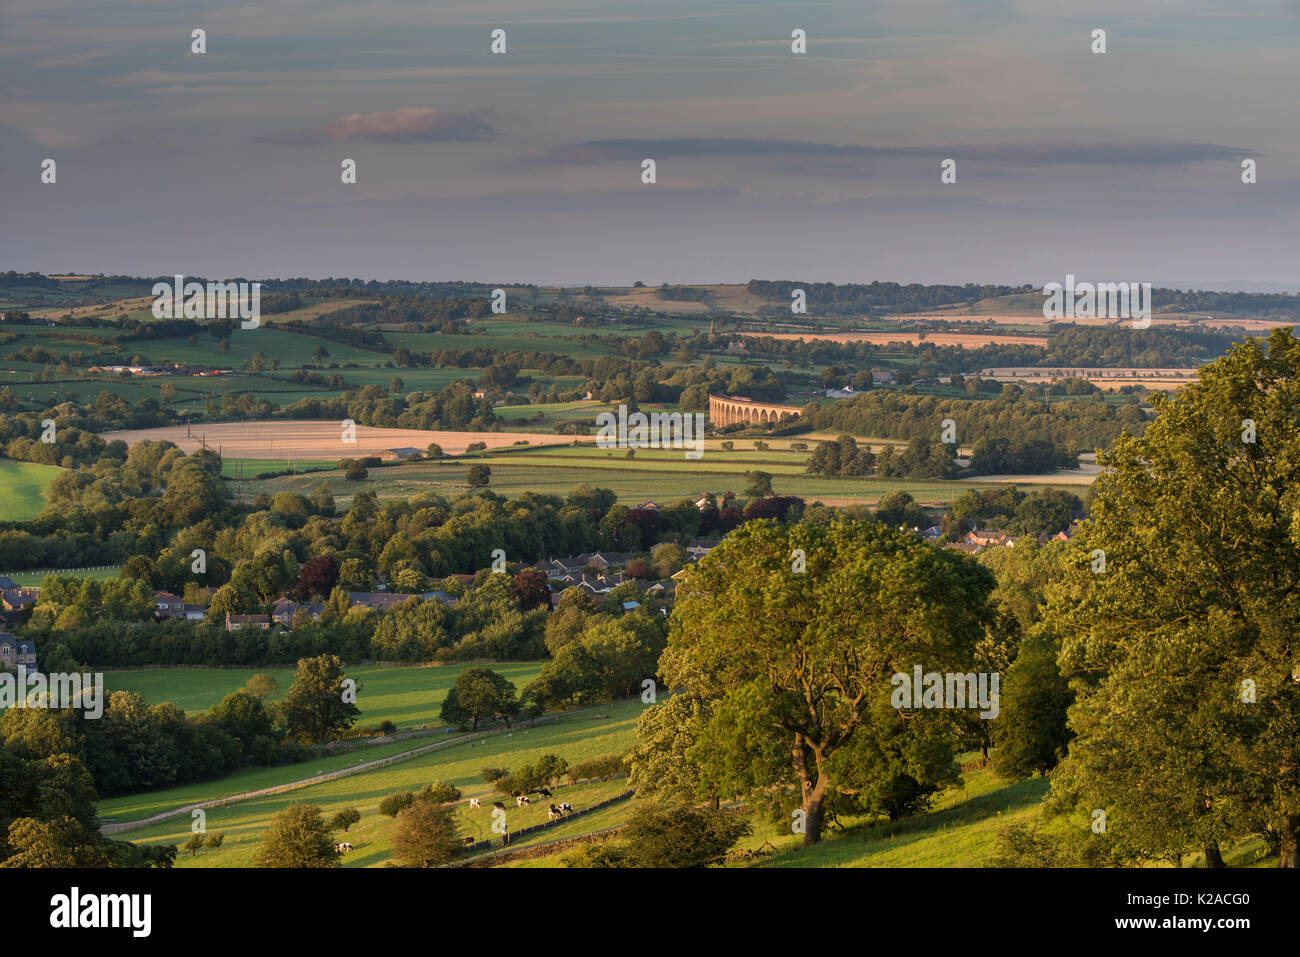 High view over sunlit Wharfe Valley, with Pool in Wharfedale village & Arthington viaduct in a scenic rural landscape - Yorkshire, England, UK. Stock Photo